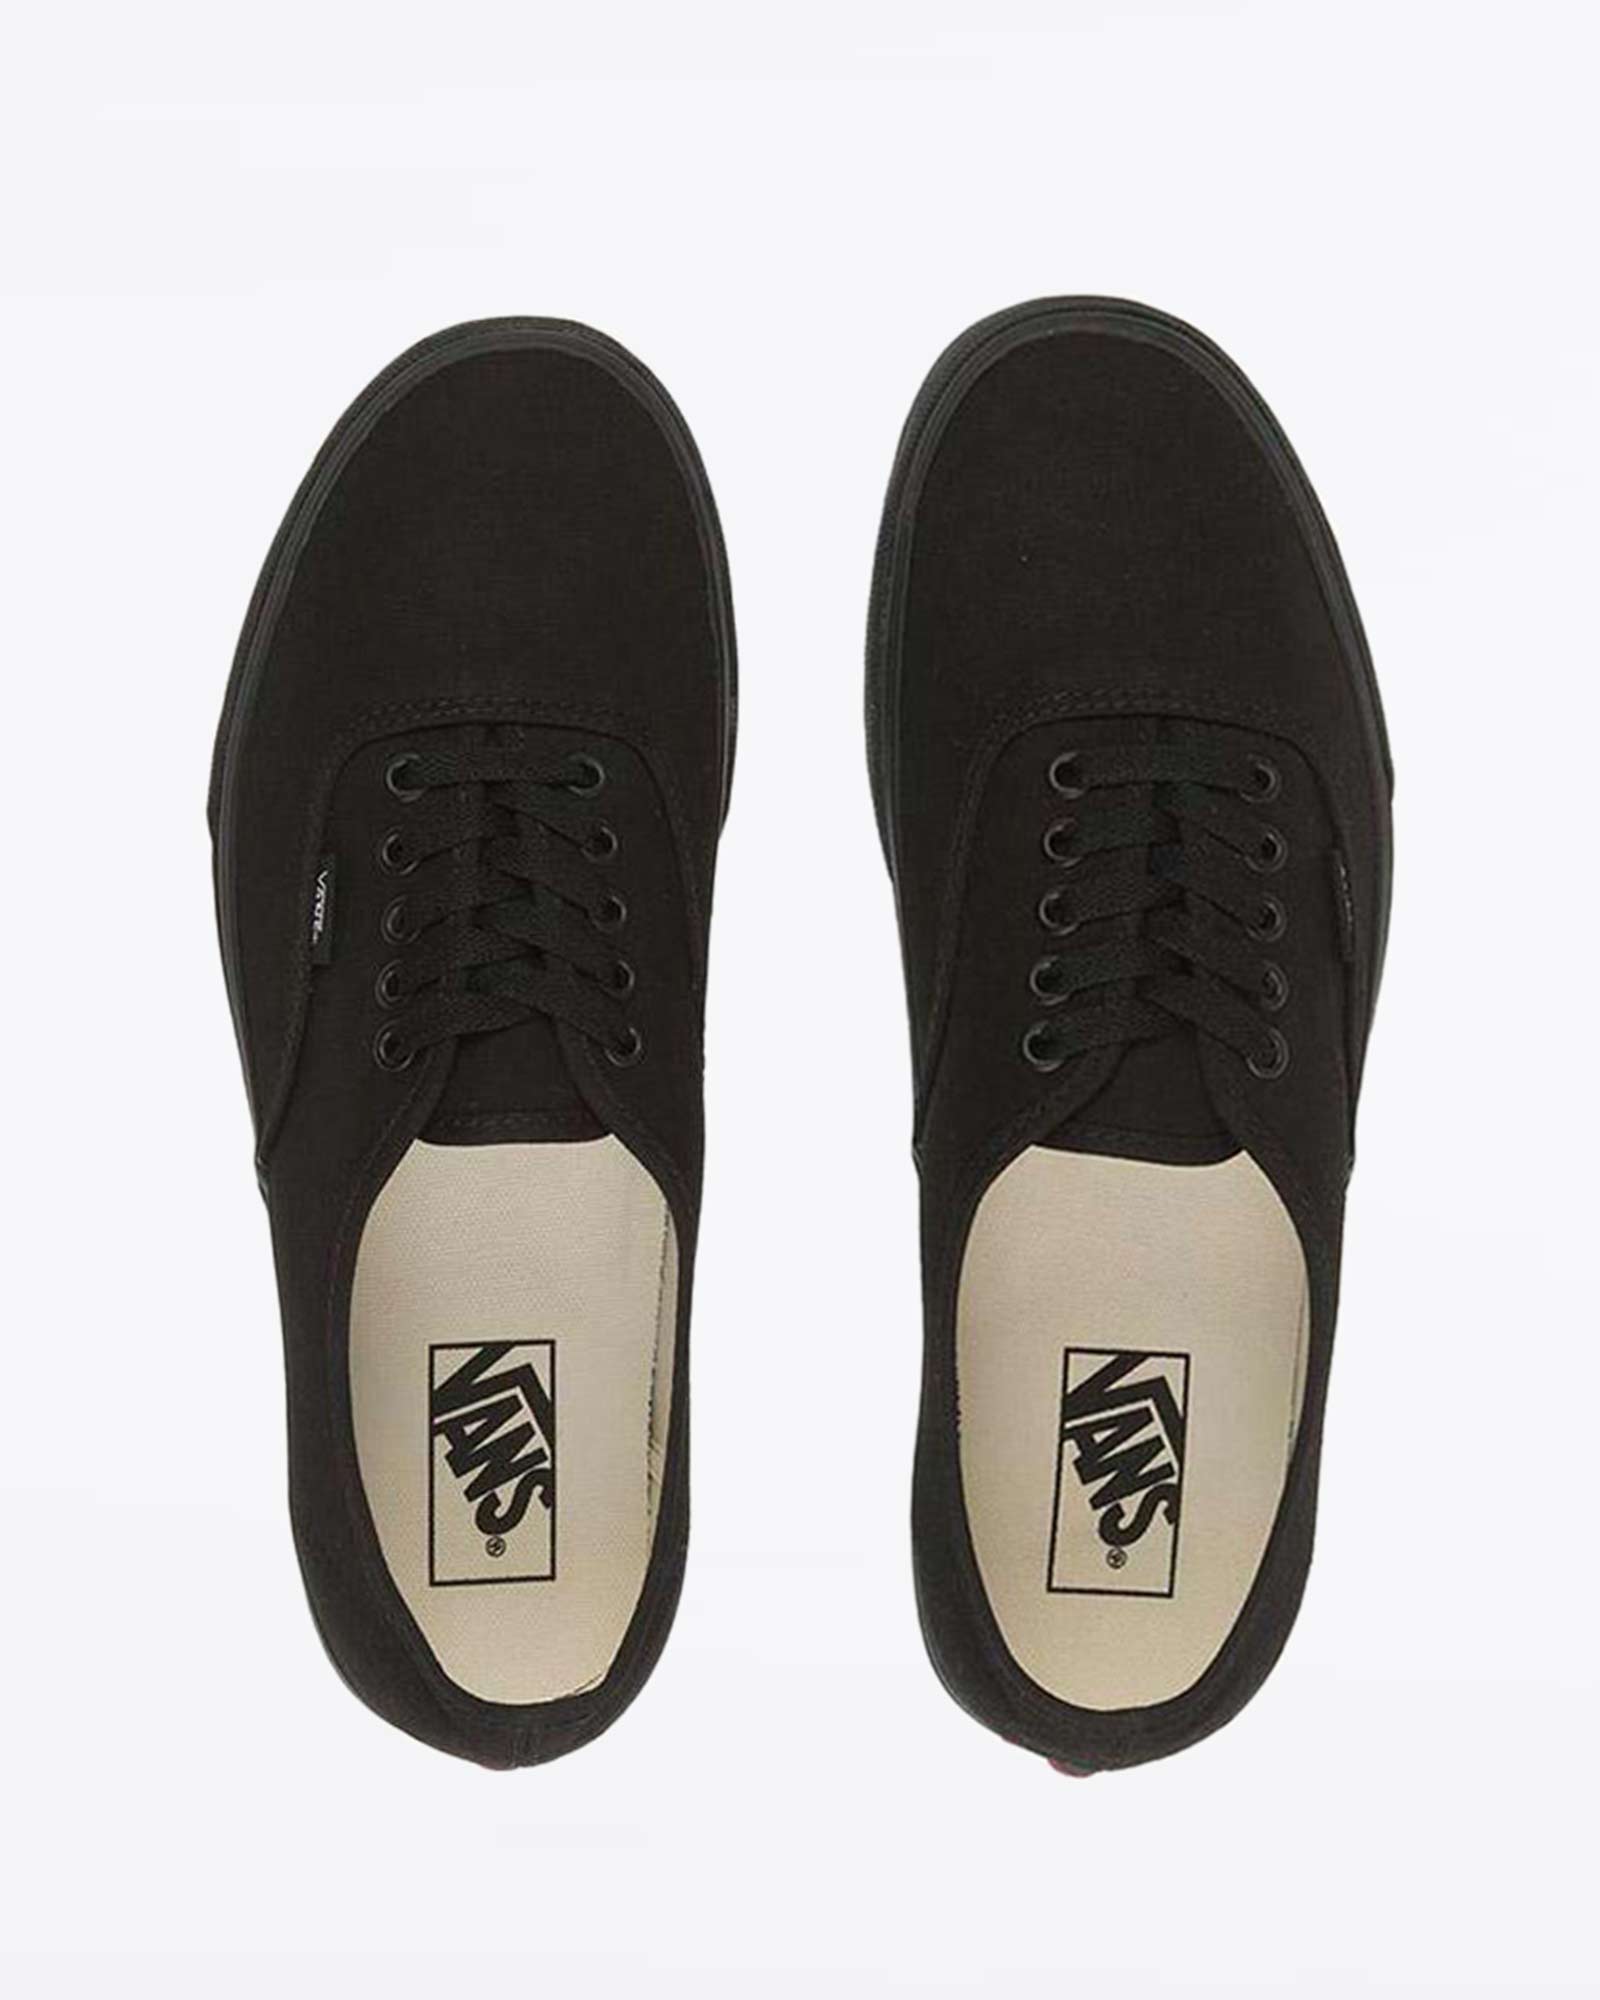 Vans Authentic Black and White Shoe | Ozmosis | Boots + Sneakers